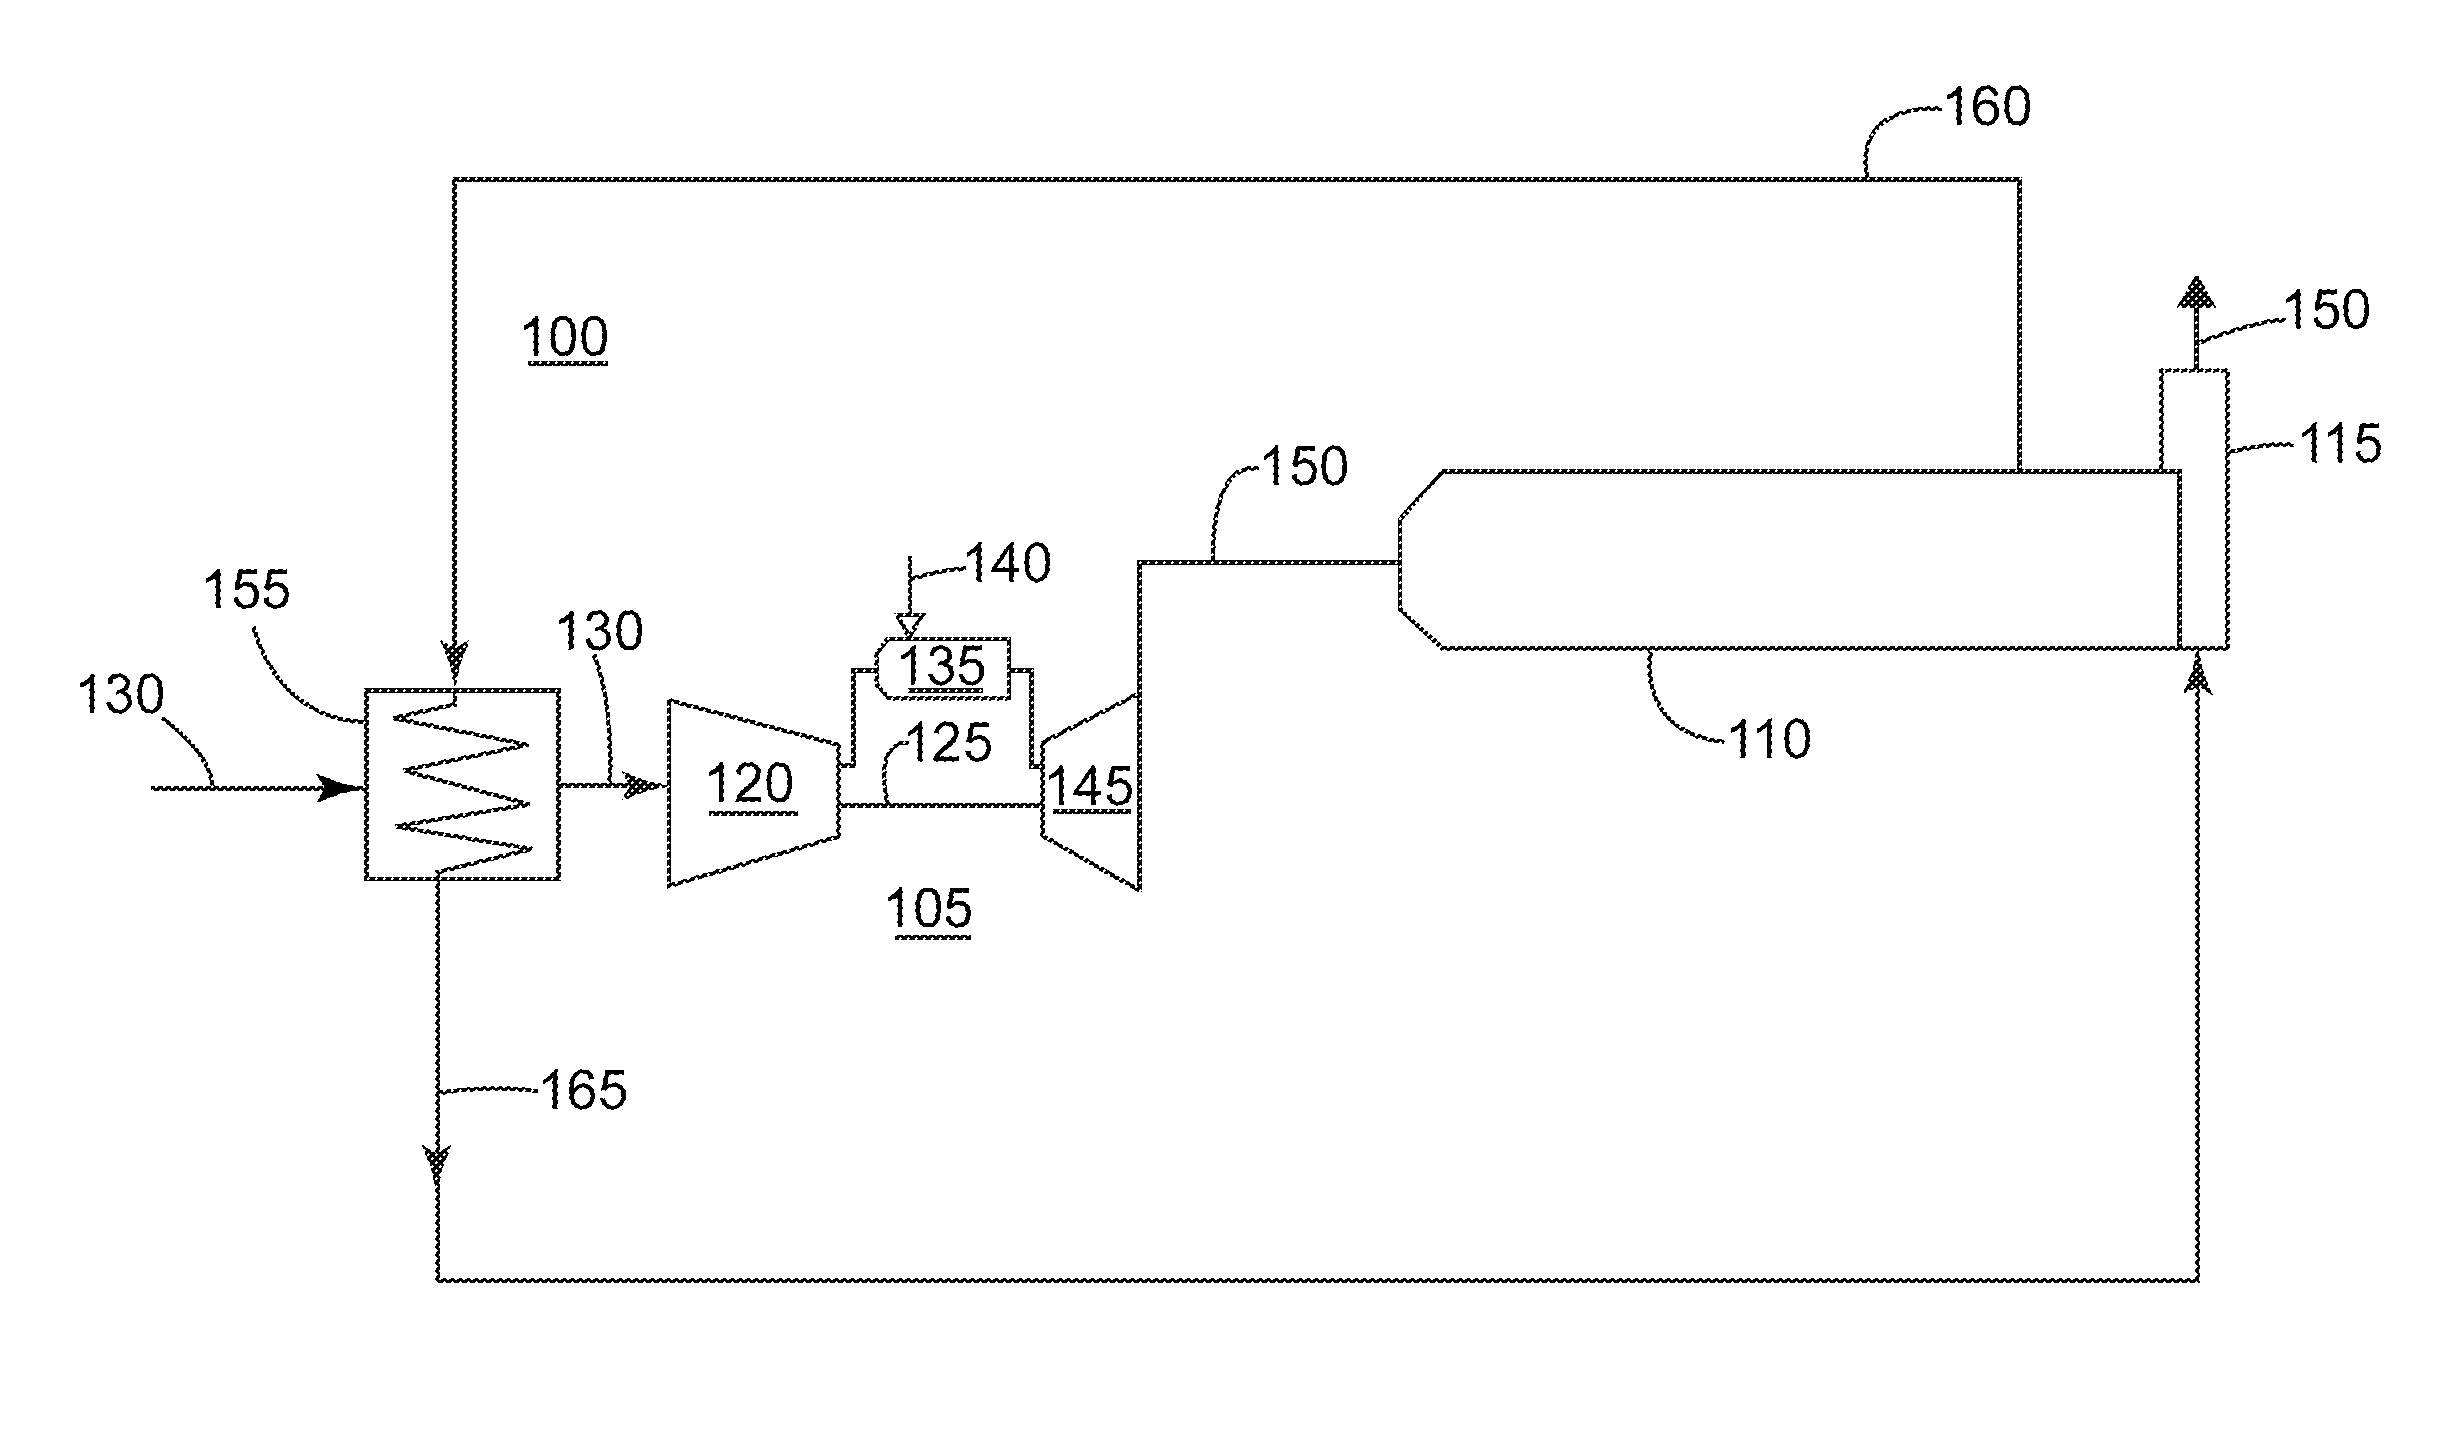 System for extending the turndown range of a turbomachine